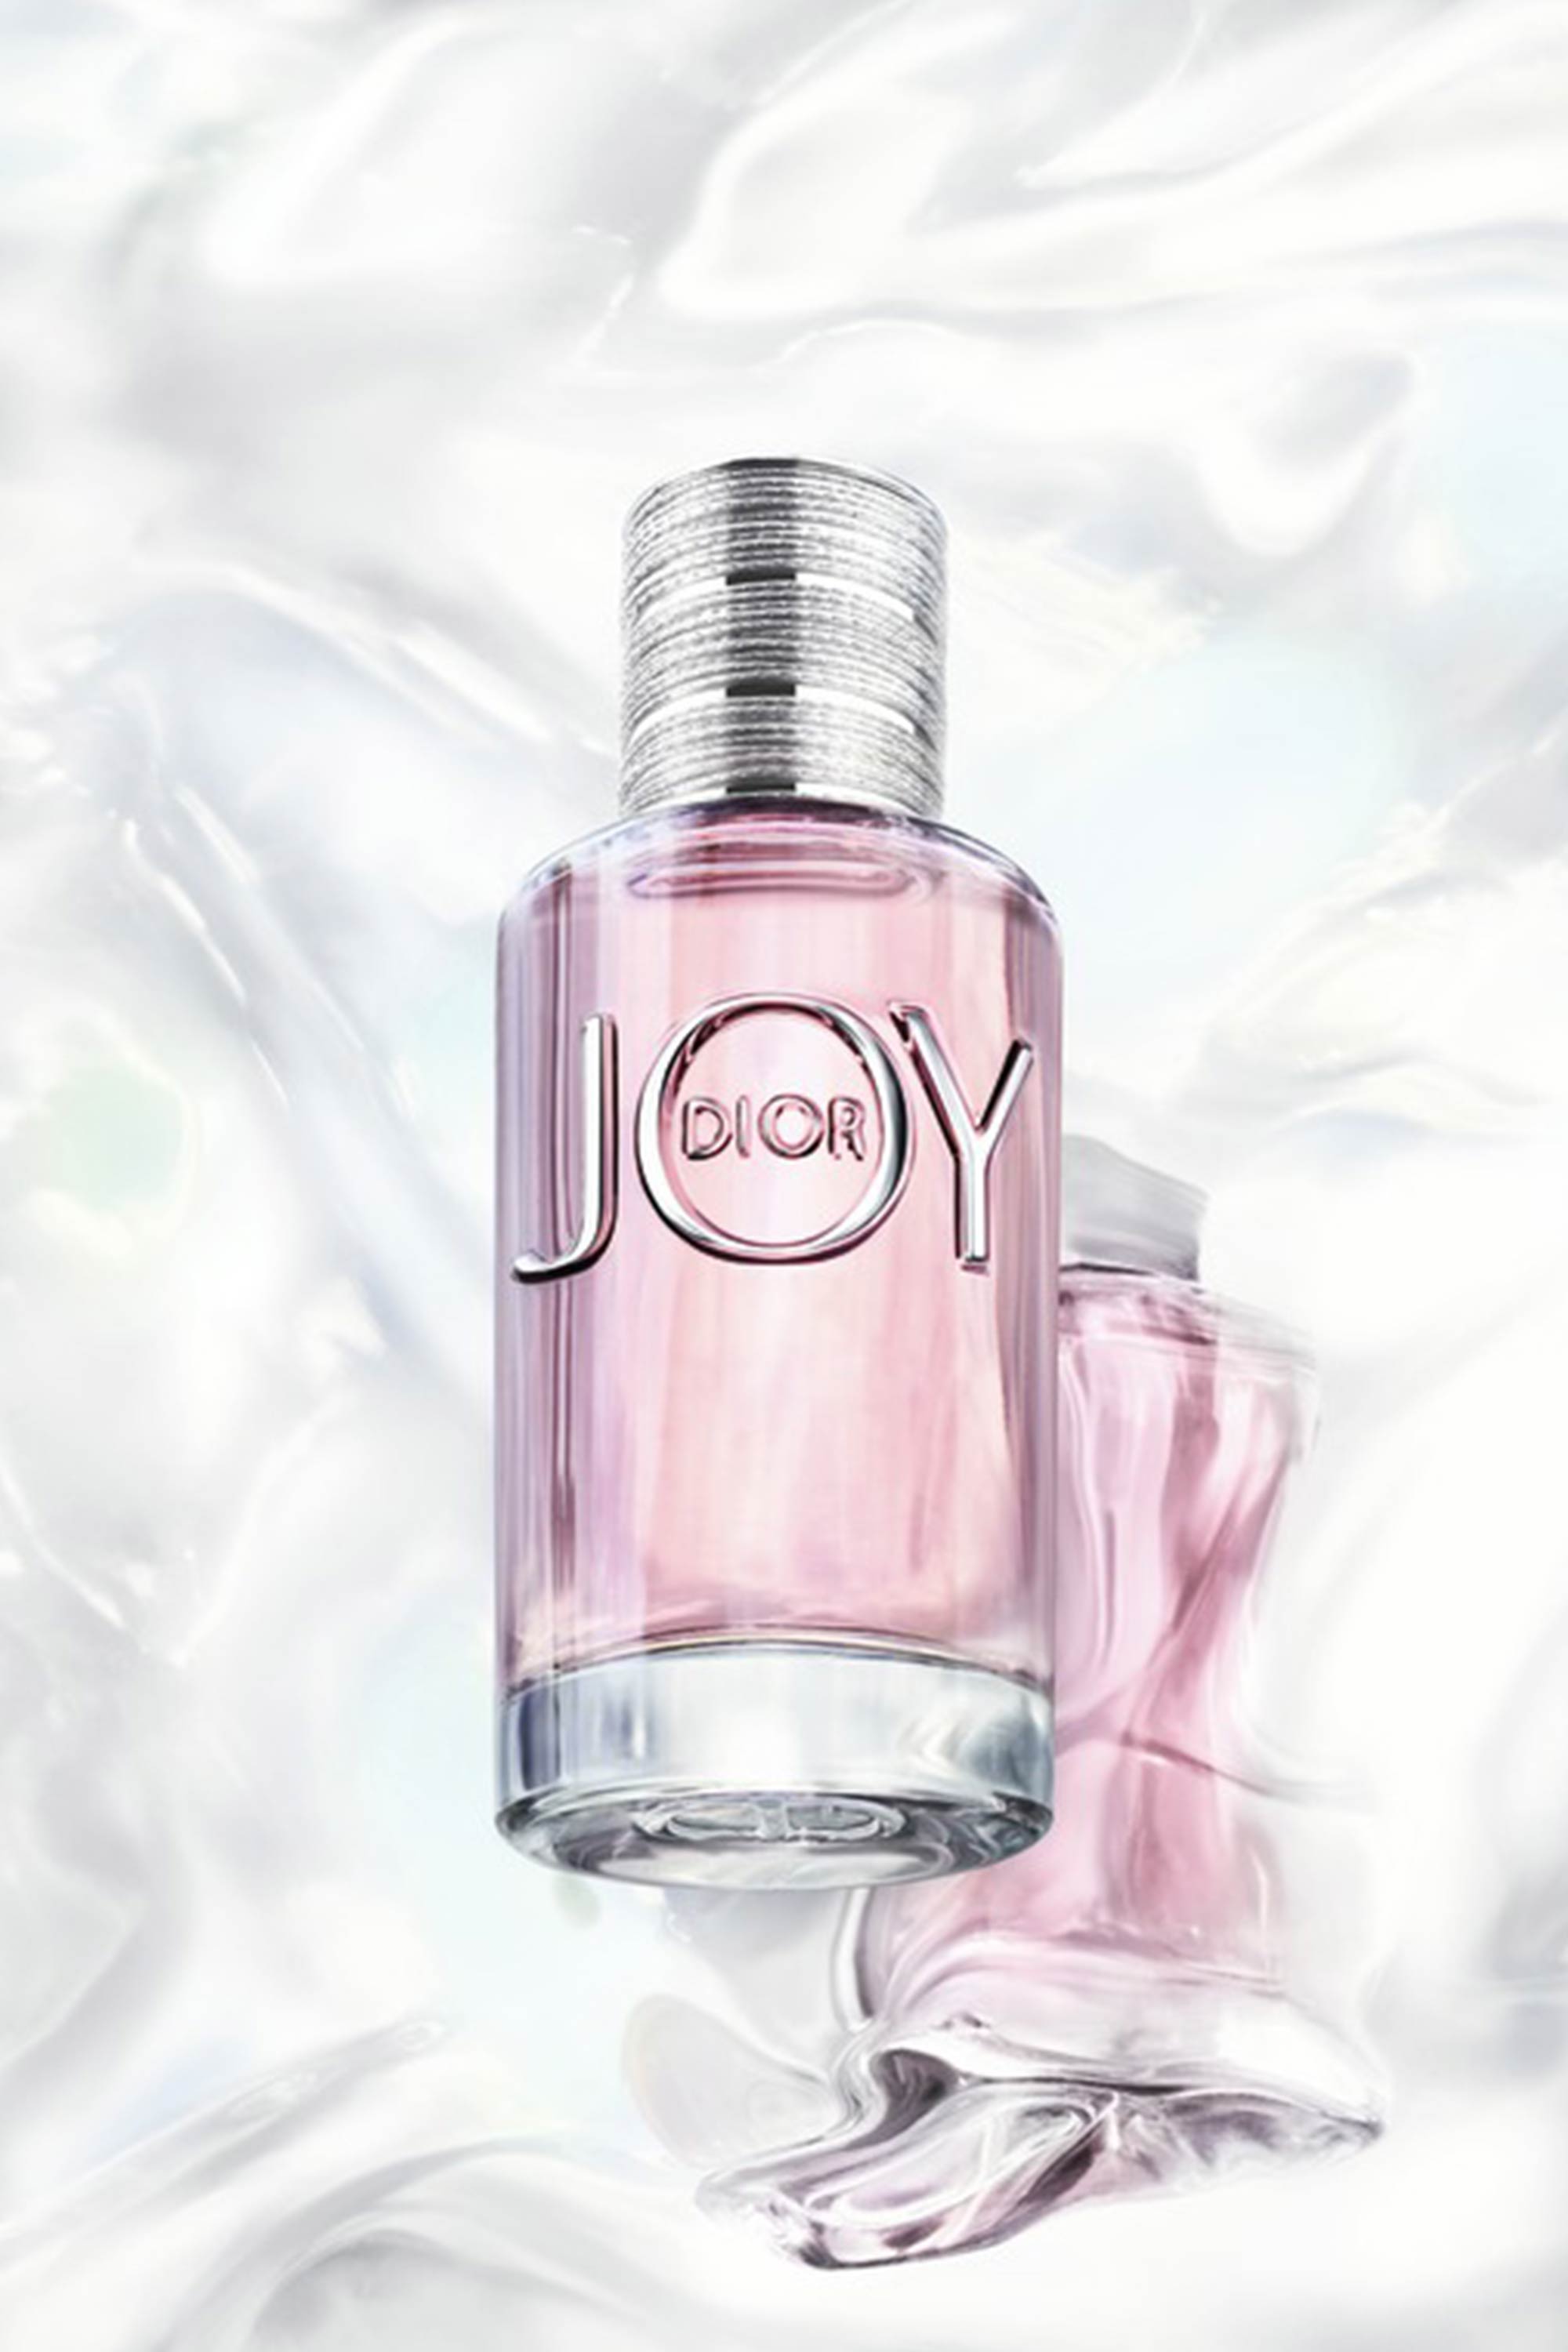 JOY by Dior: a new fragrance experience 